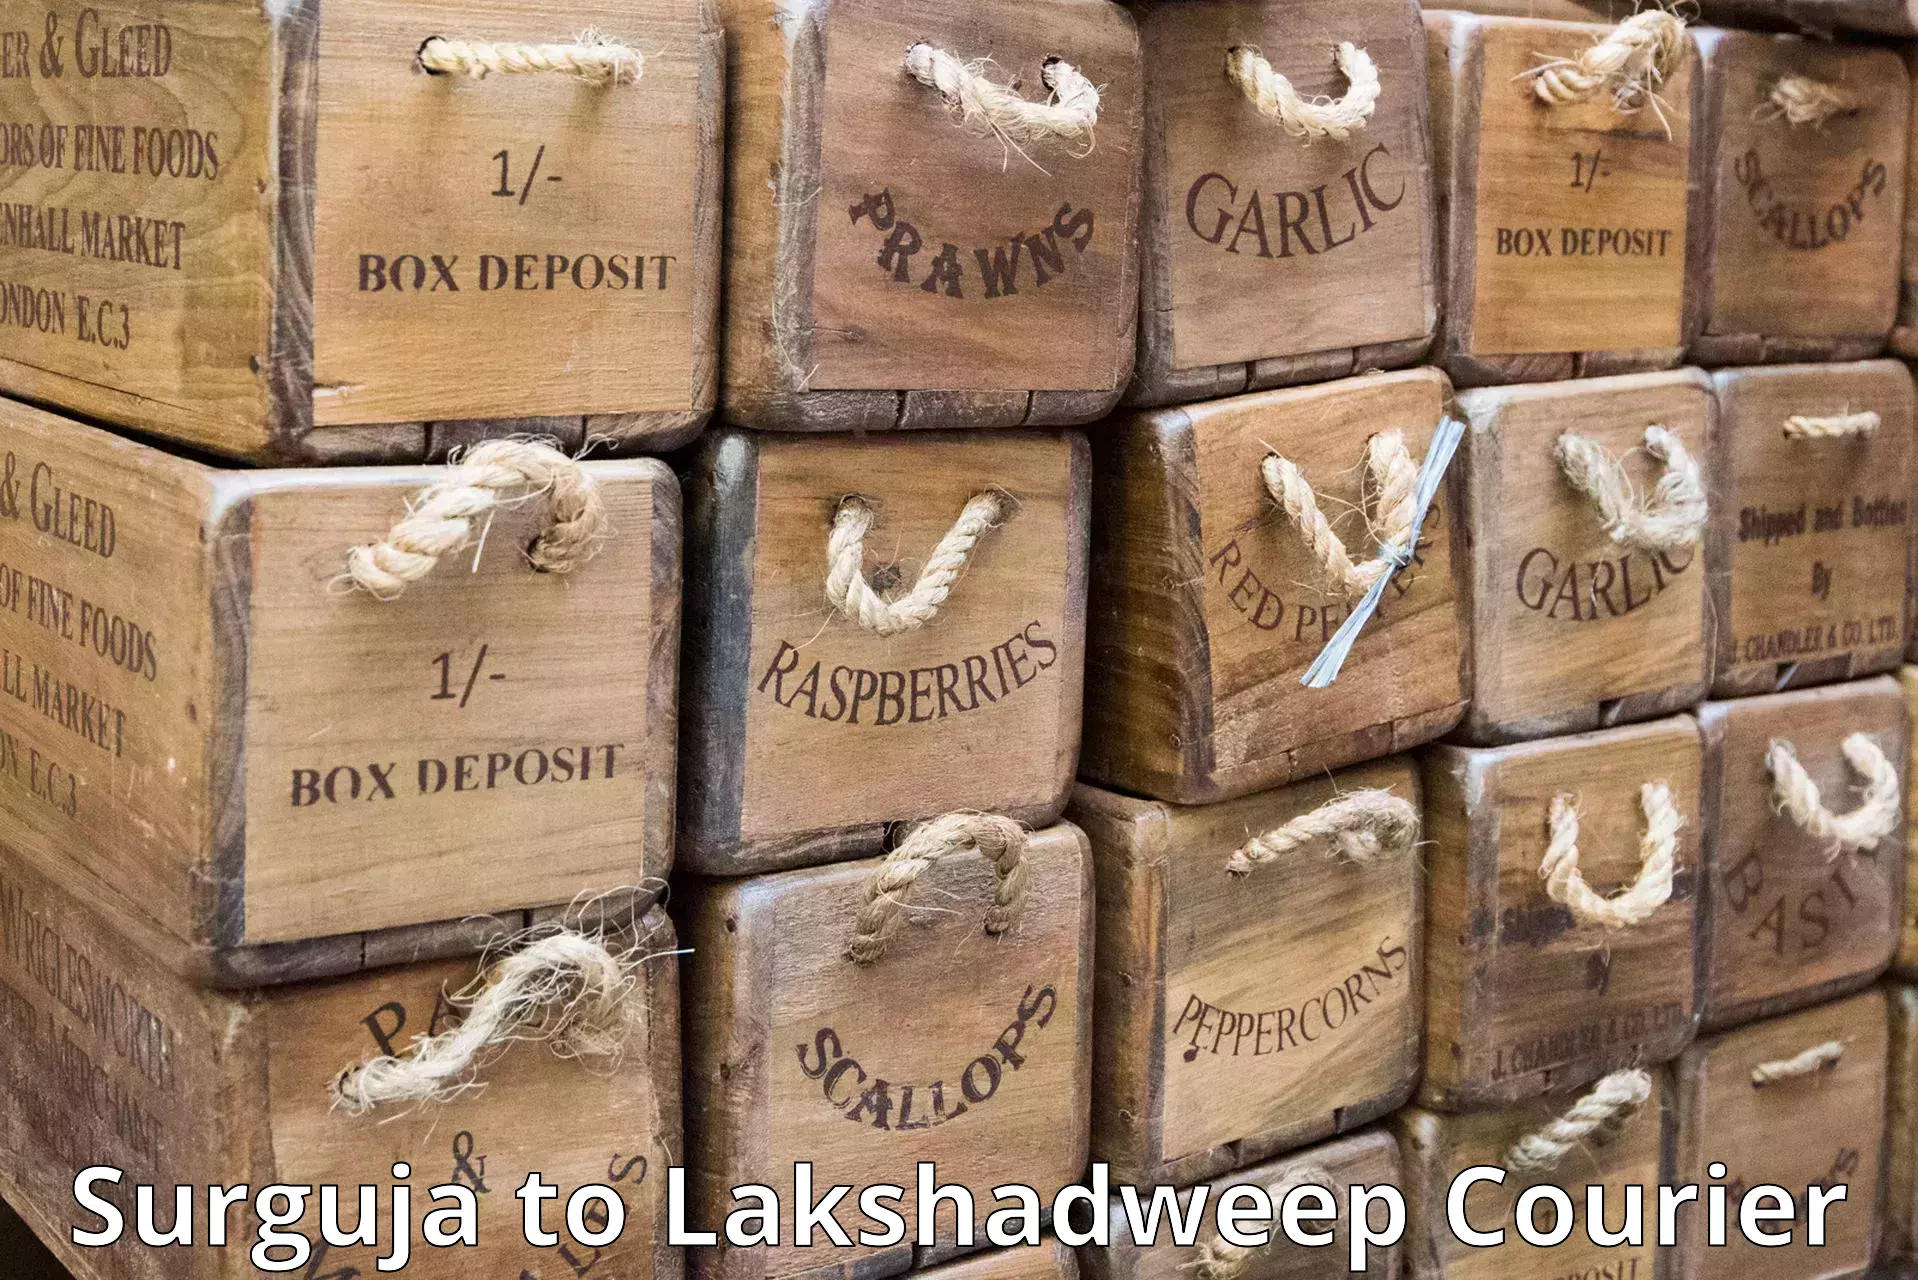 Subscription-based courier Surguja to Lakshadweep